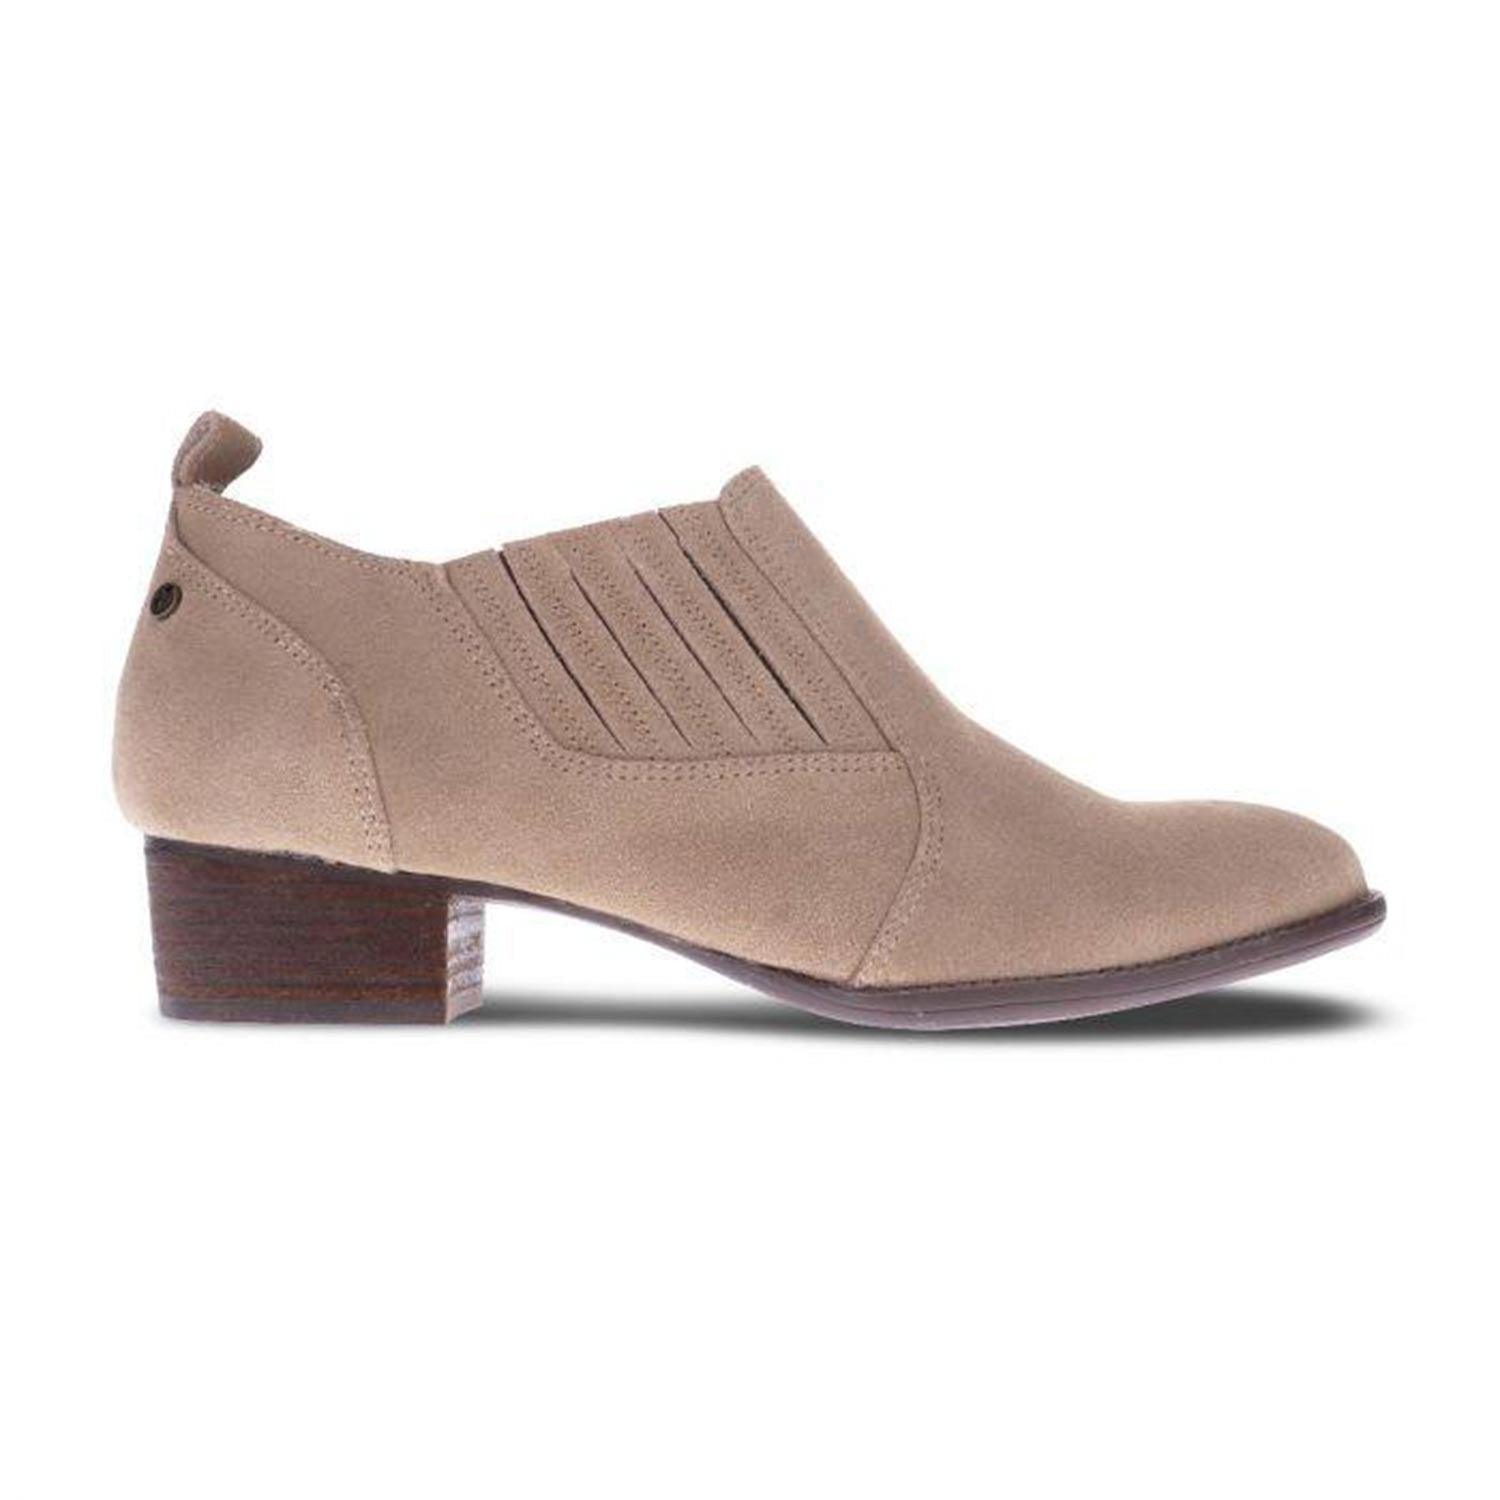 Revere Palermo Shootie Orthotic Boot Taupe - Anjelstore 